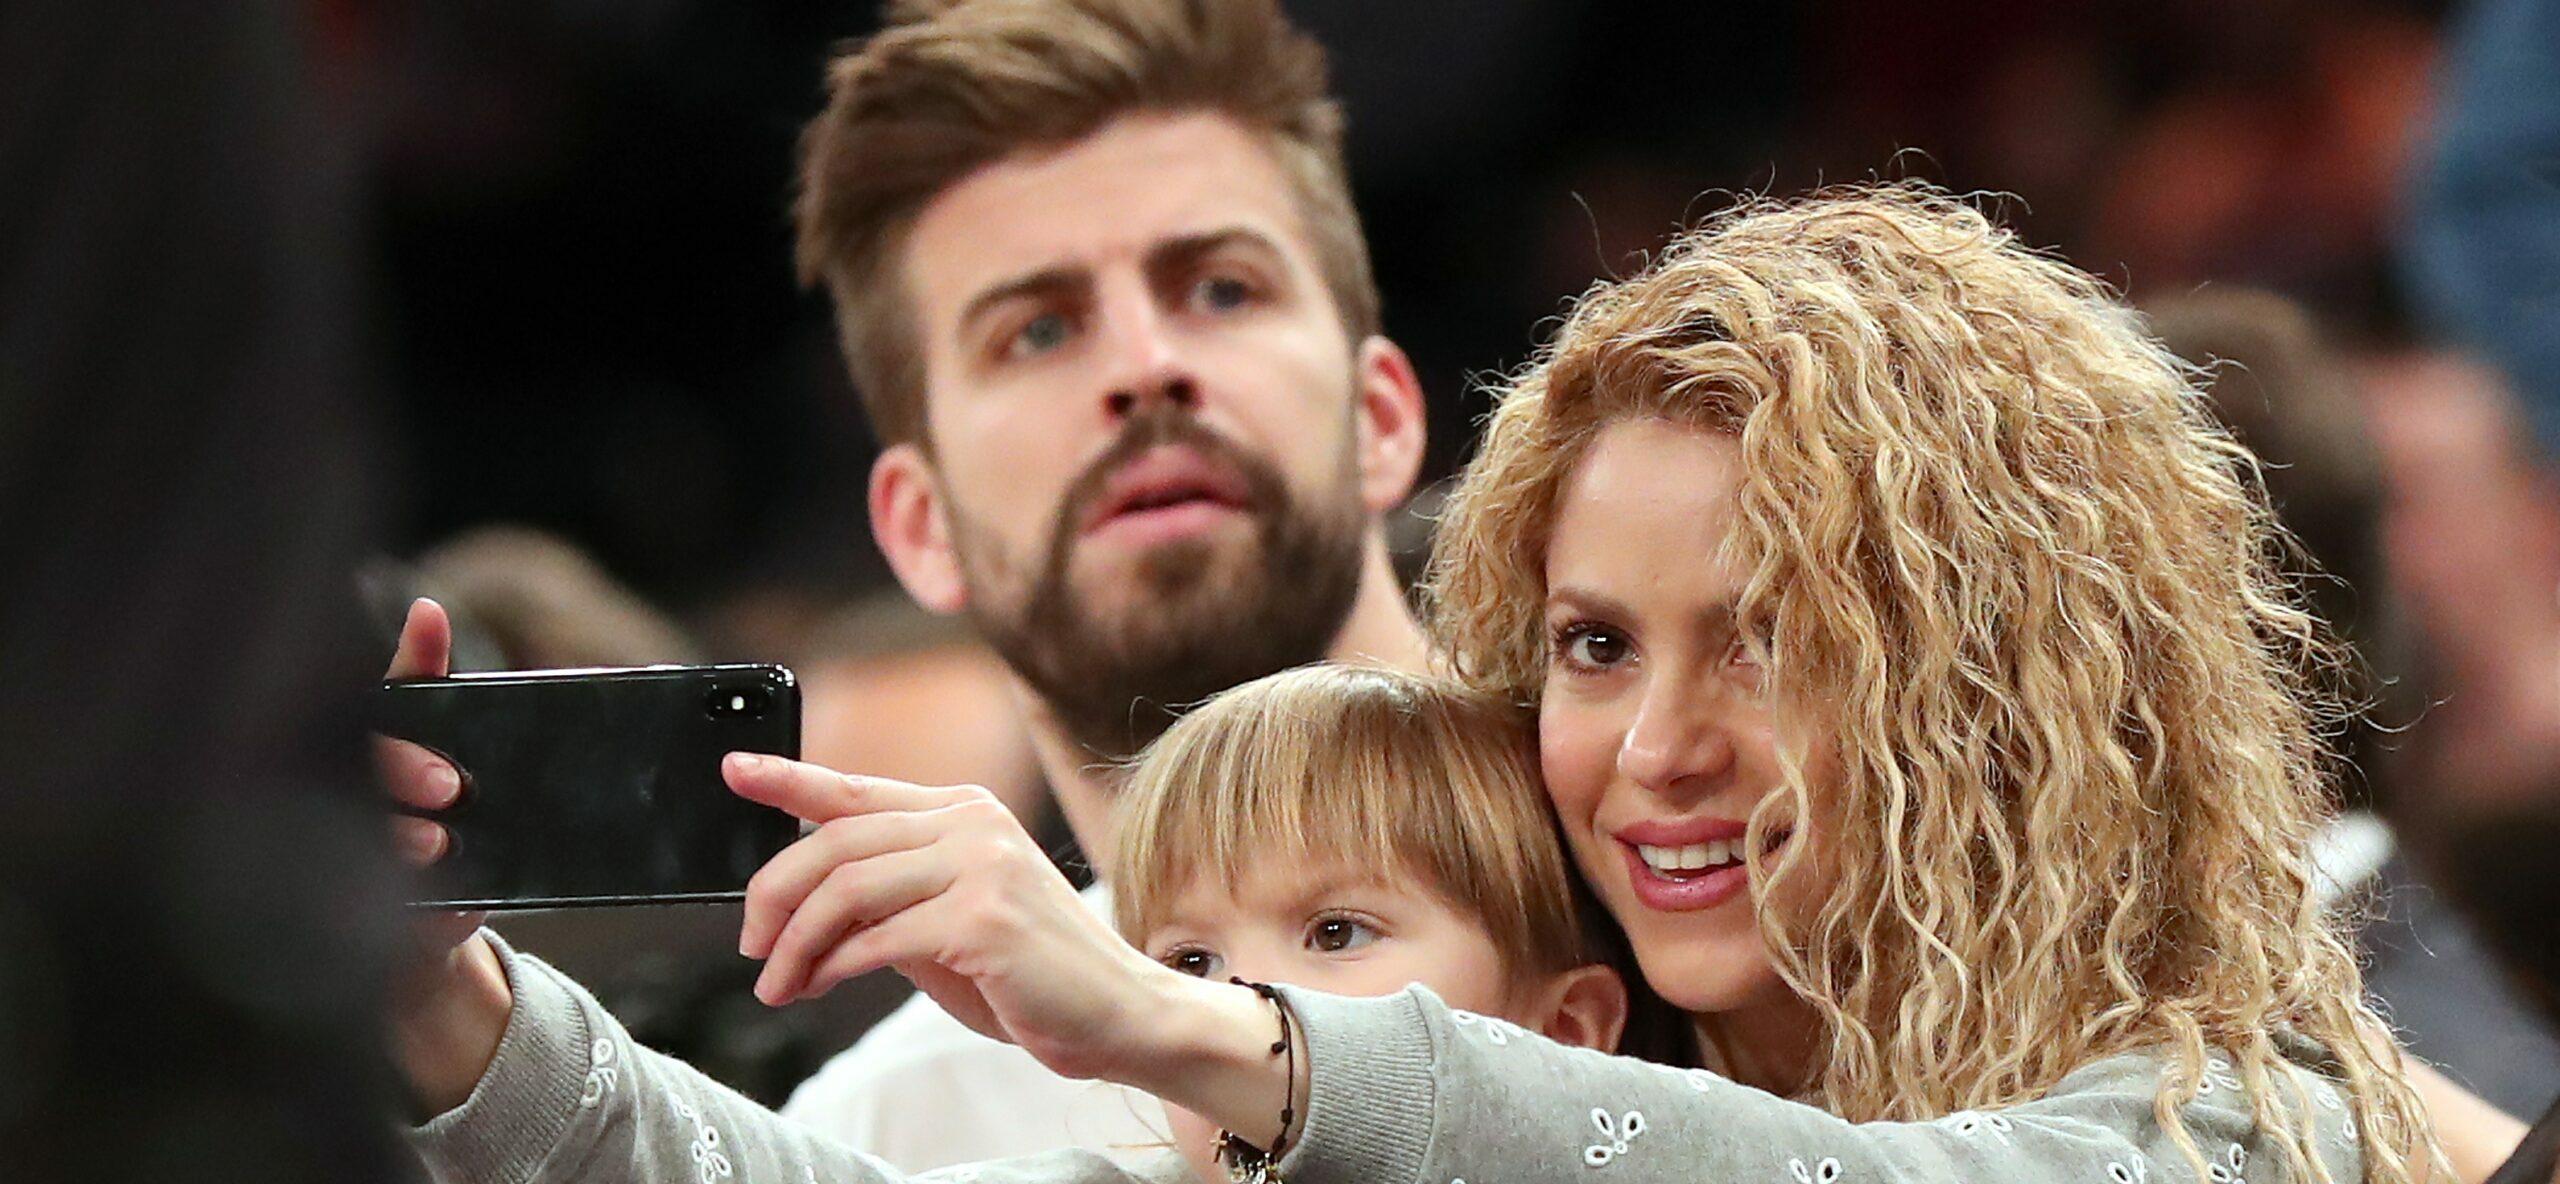 Shakira’s Ex, Gerard Piqué, Introduces Young, New Girlfriend To Their Children